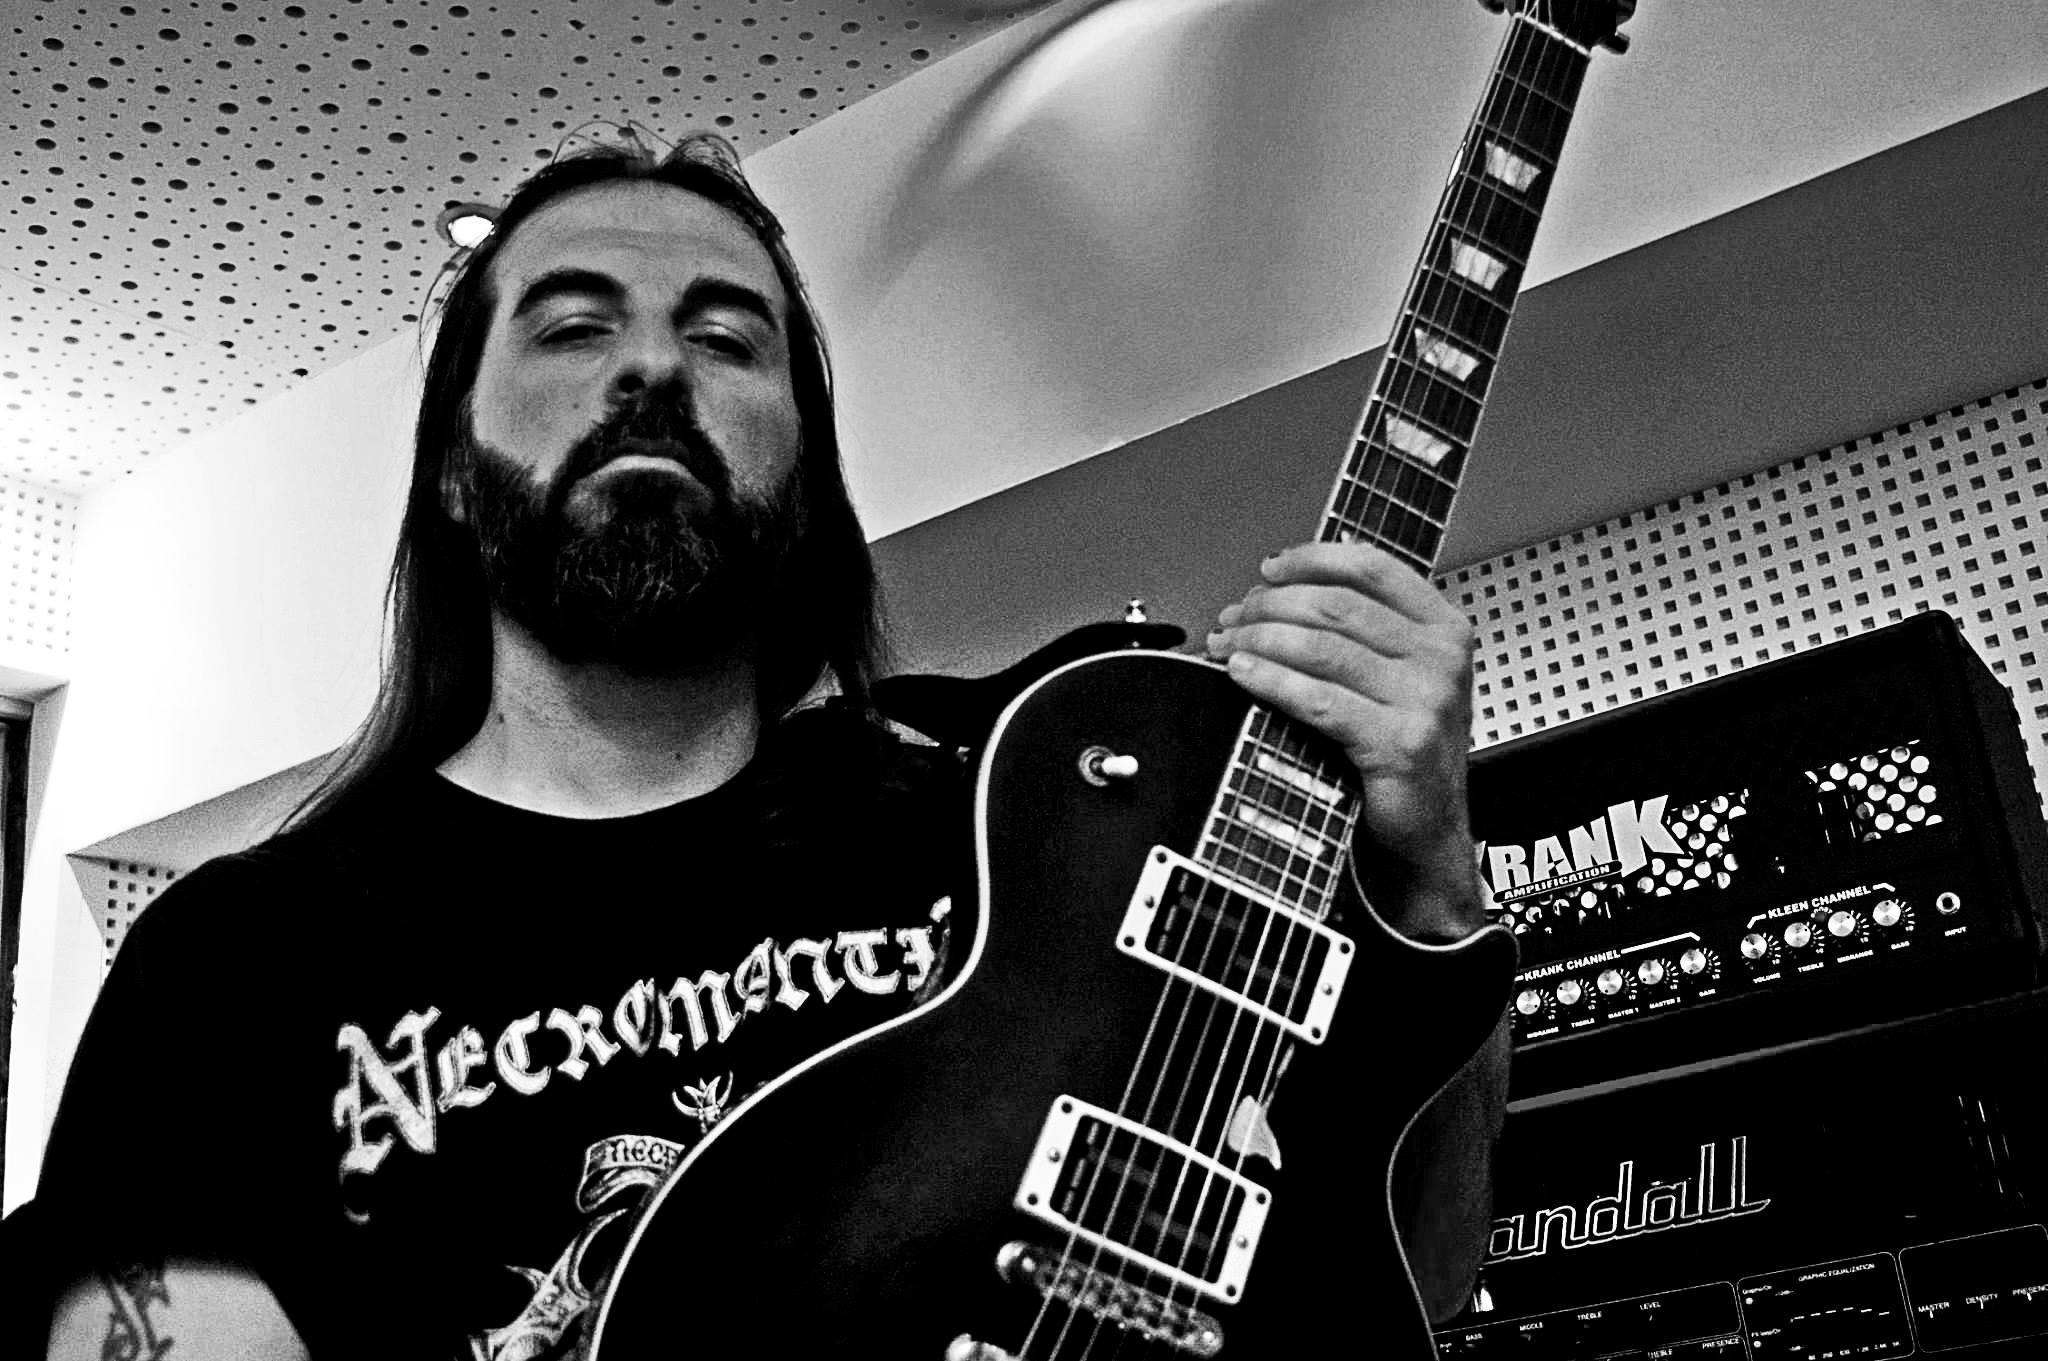 You are currently viewing NEKPΩN IAXEΣ: Το νέο σκοτεινό project του Σάκη Τόλη (ROTTING CHRIST) και του Andrew Liles (CURRENT 93)!